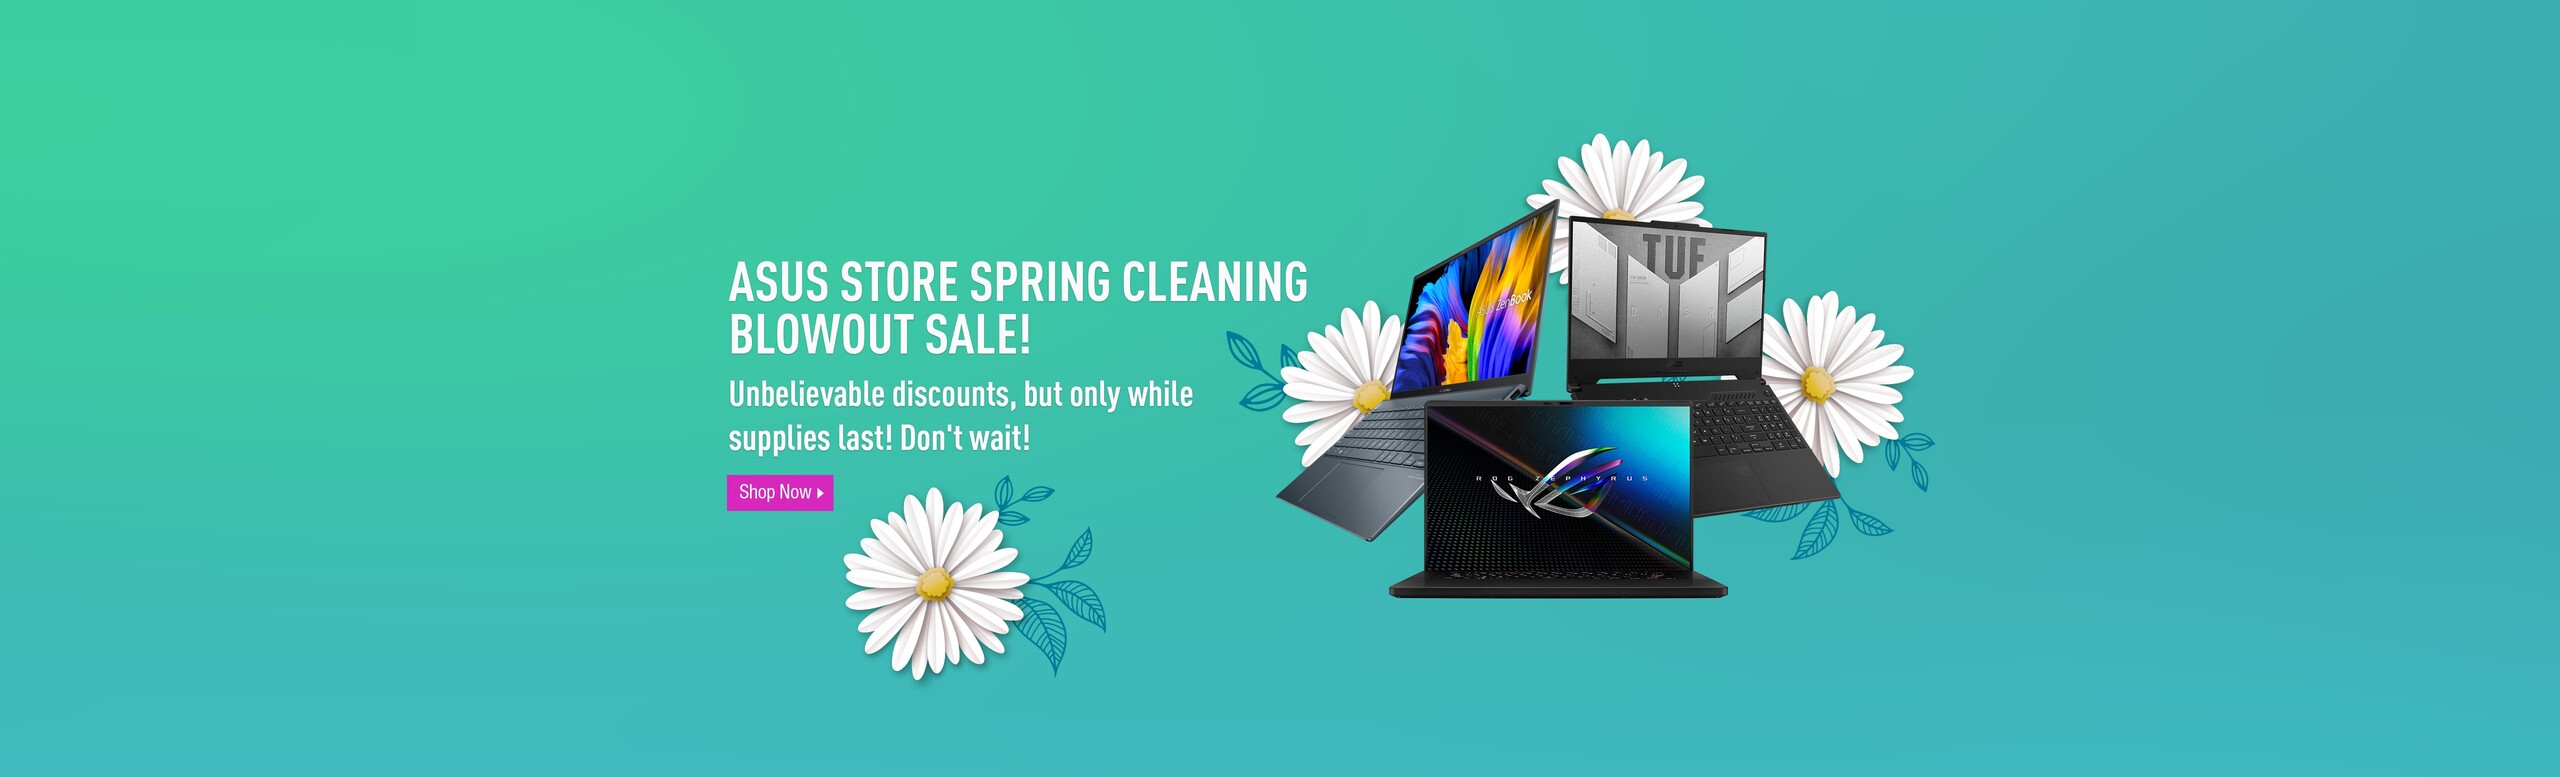 Spring Cleaning Blowout Sale